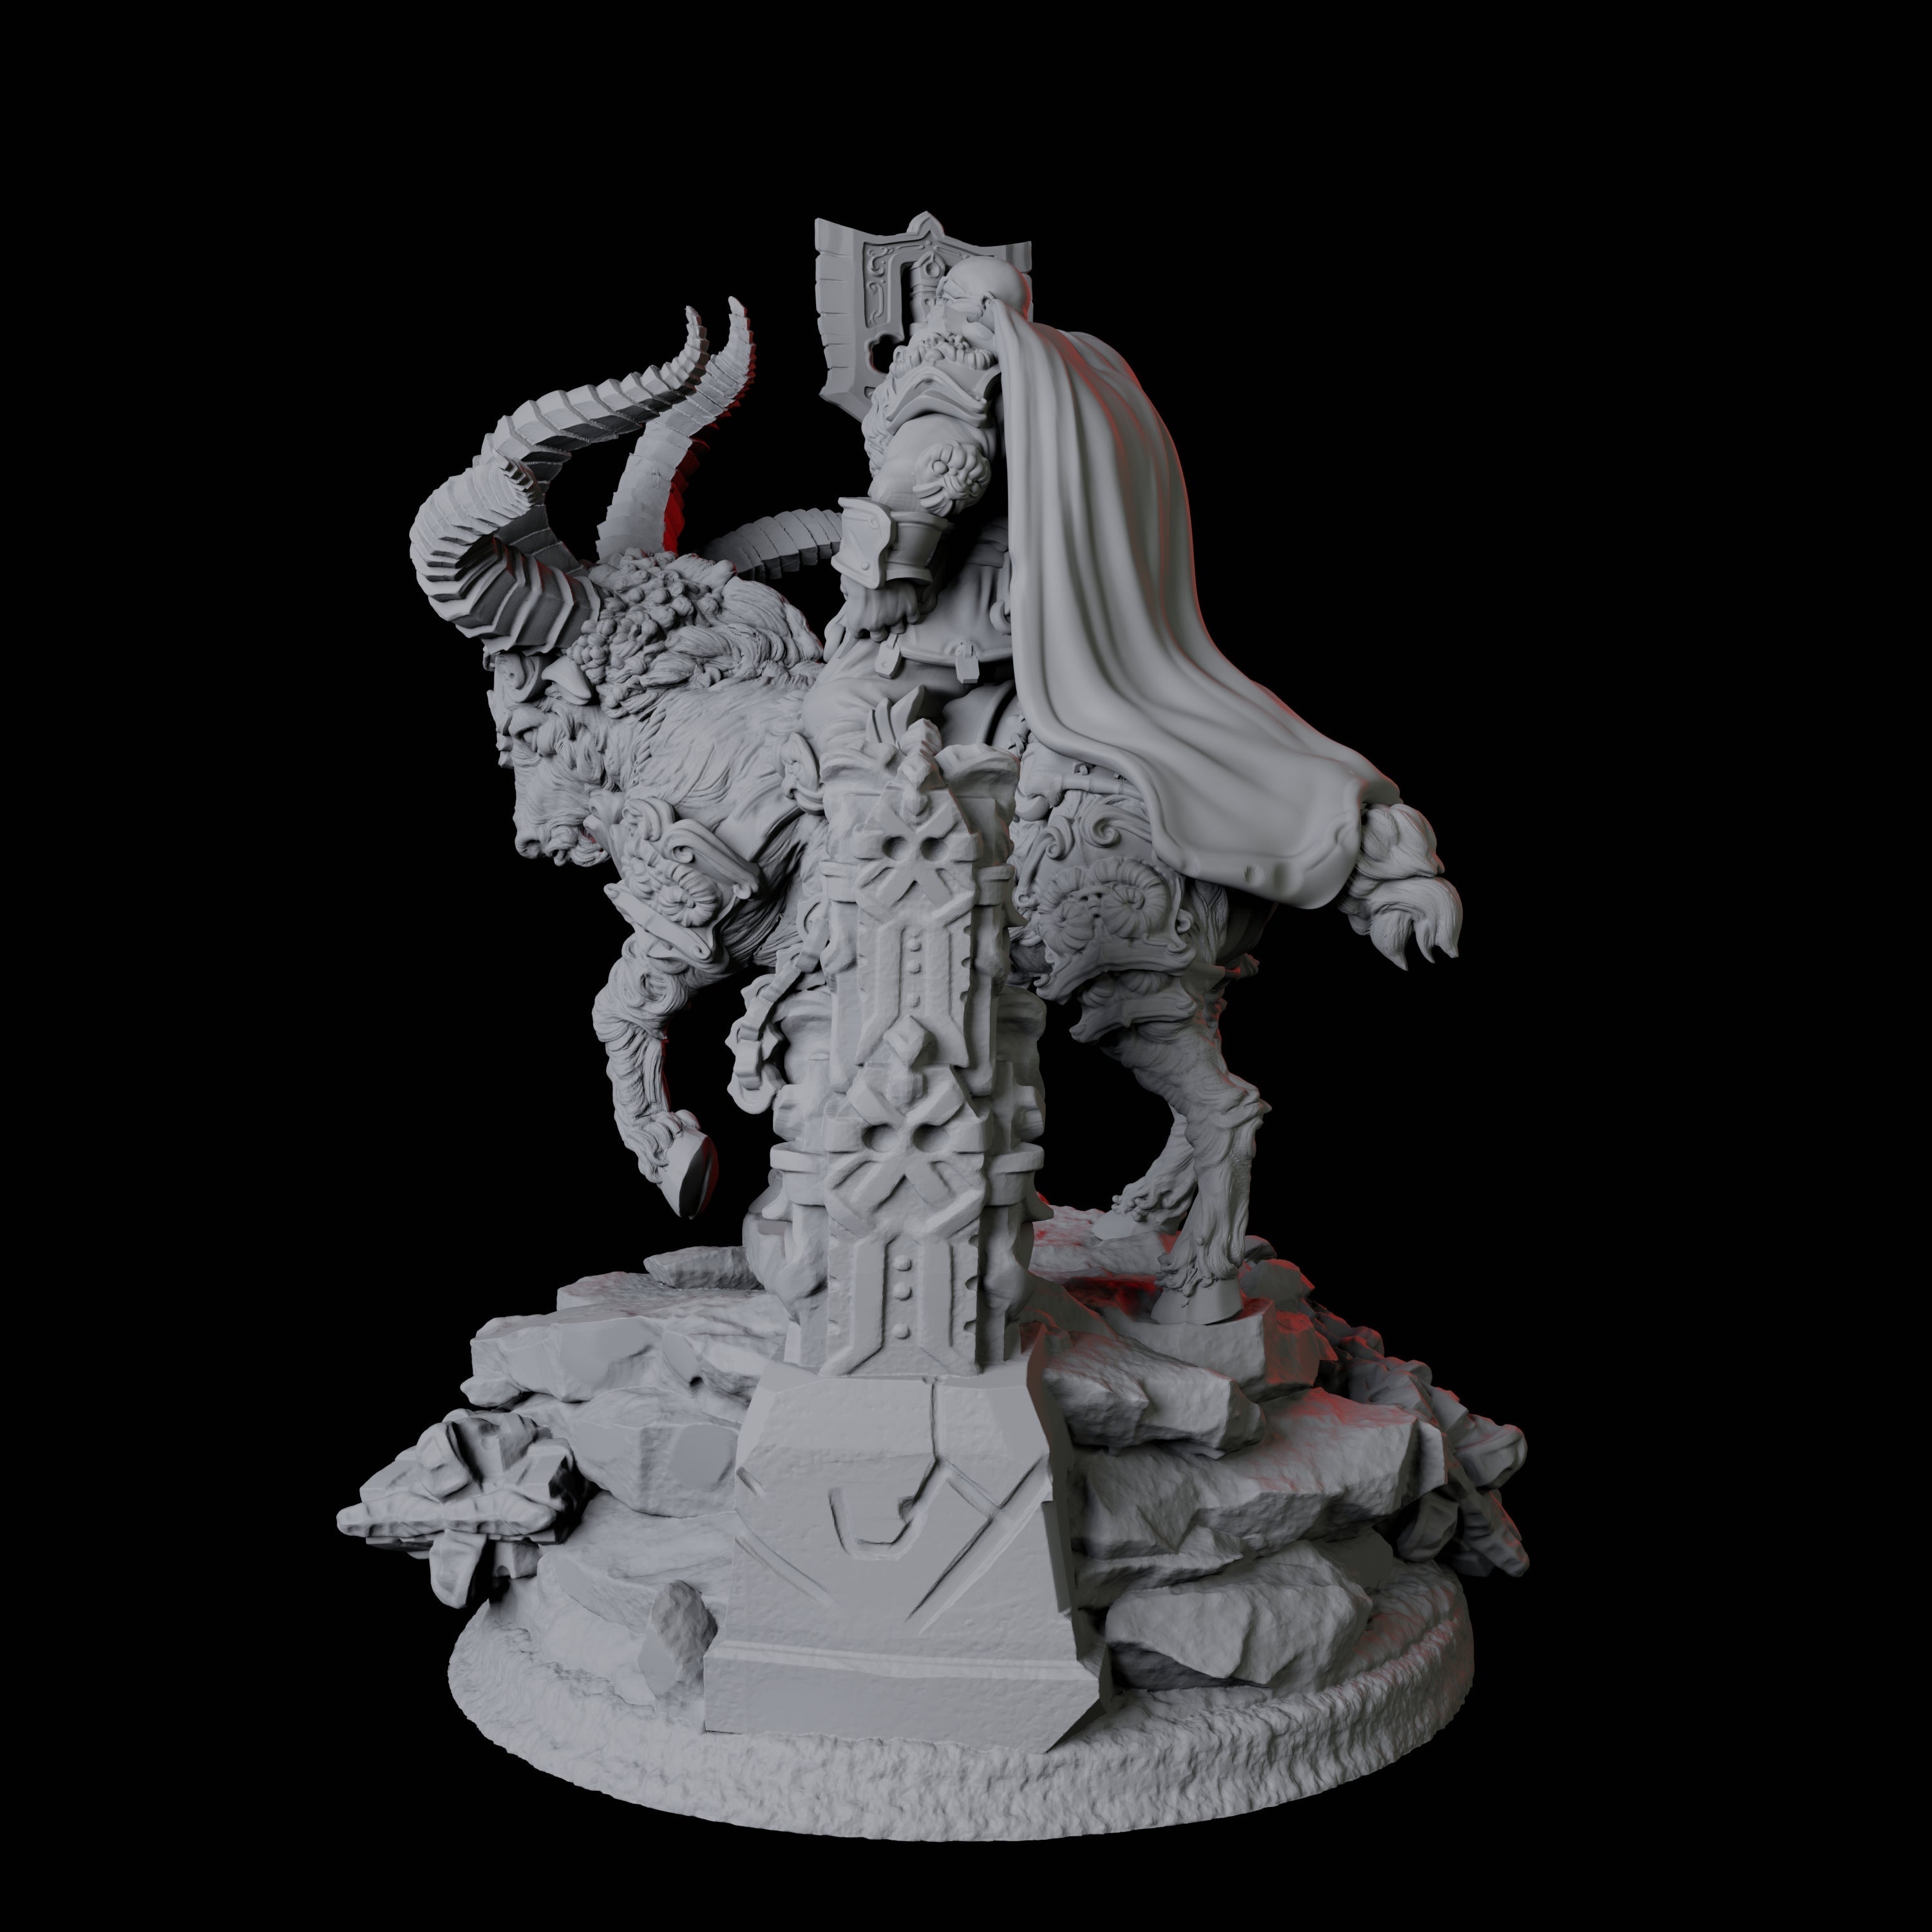 Goat Mounted Dwarf Warrior B Miniature for Dungeons and Dragons, Pathfinder or other TTRPGs